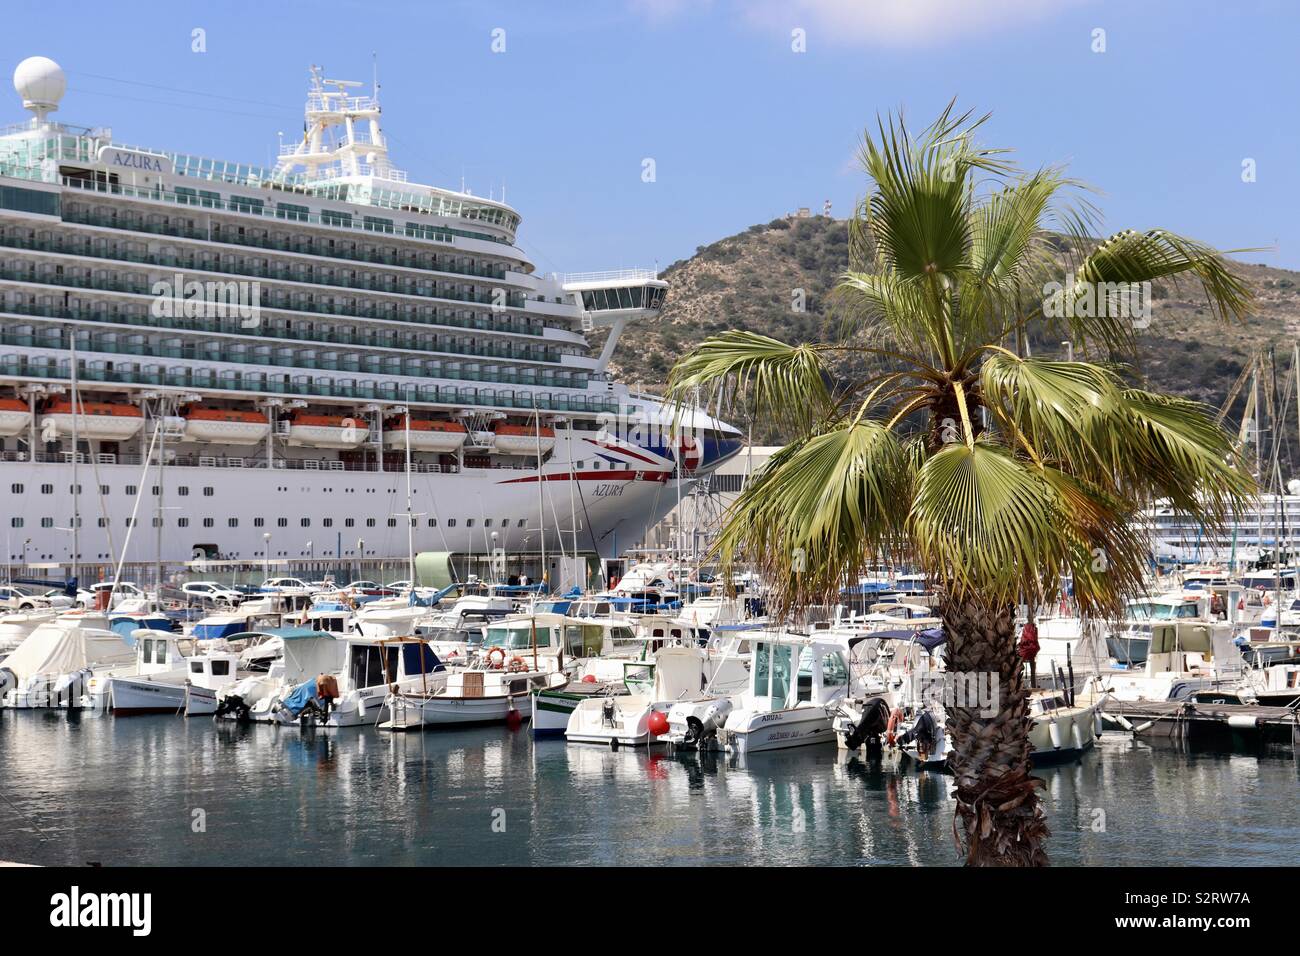 Large cruise ship towering over smaller boats in marina Stock Photo